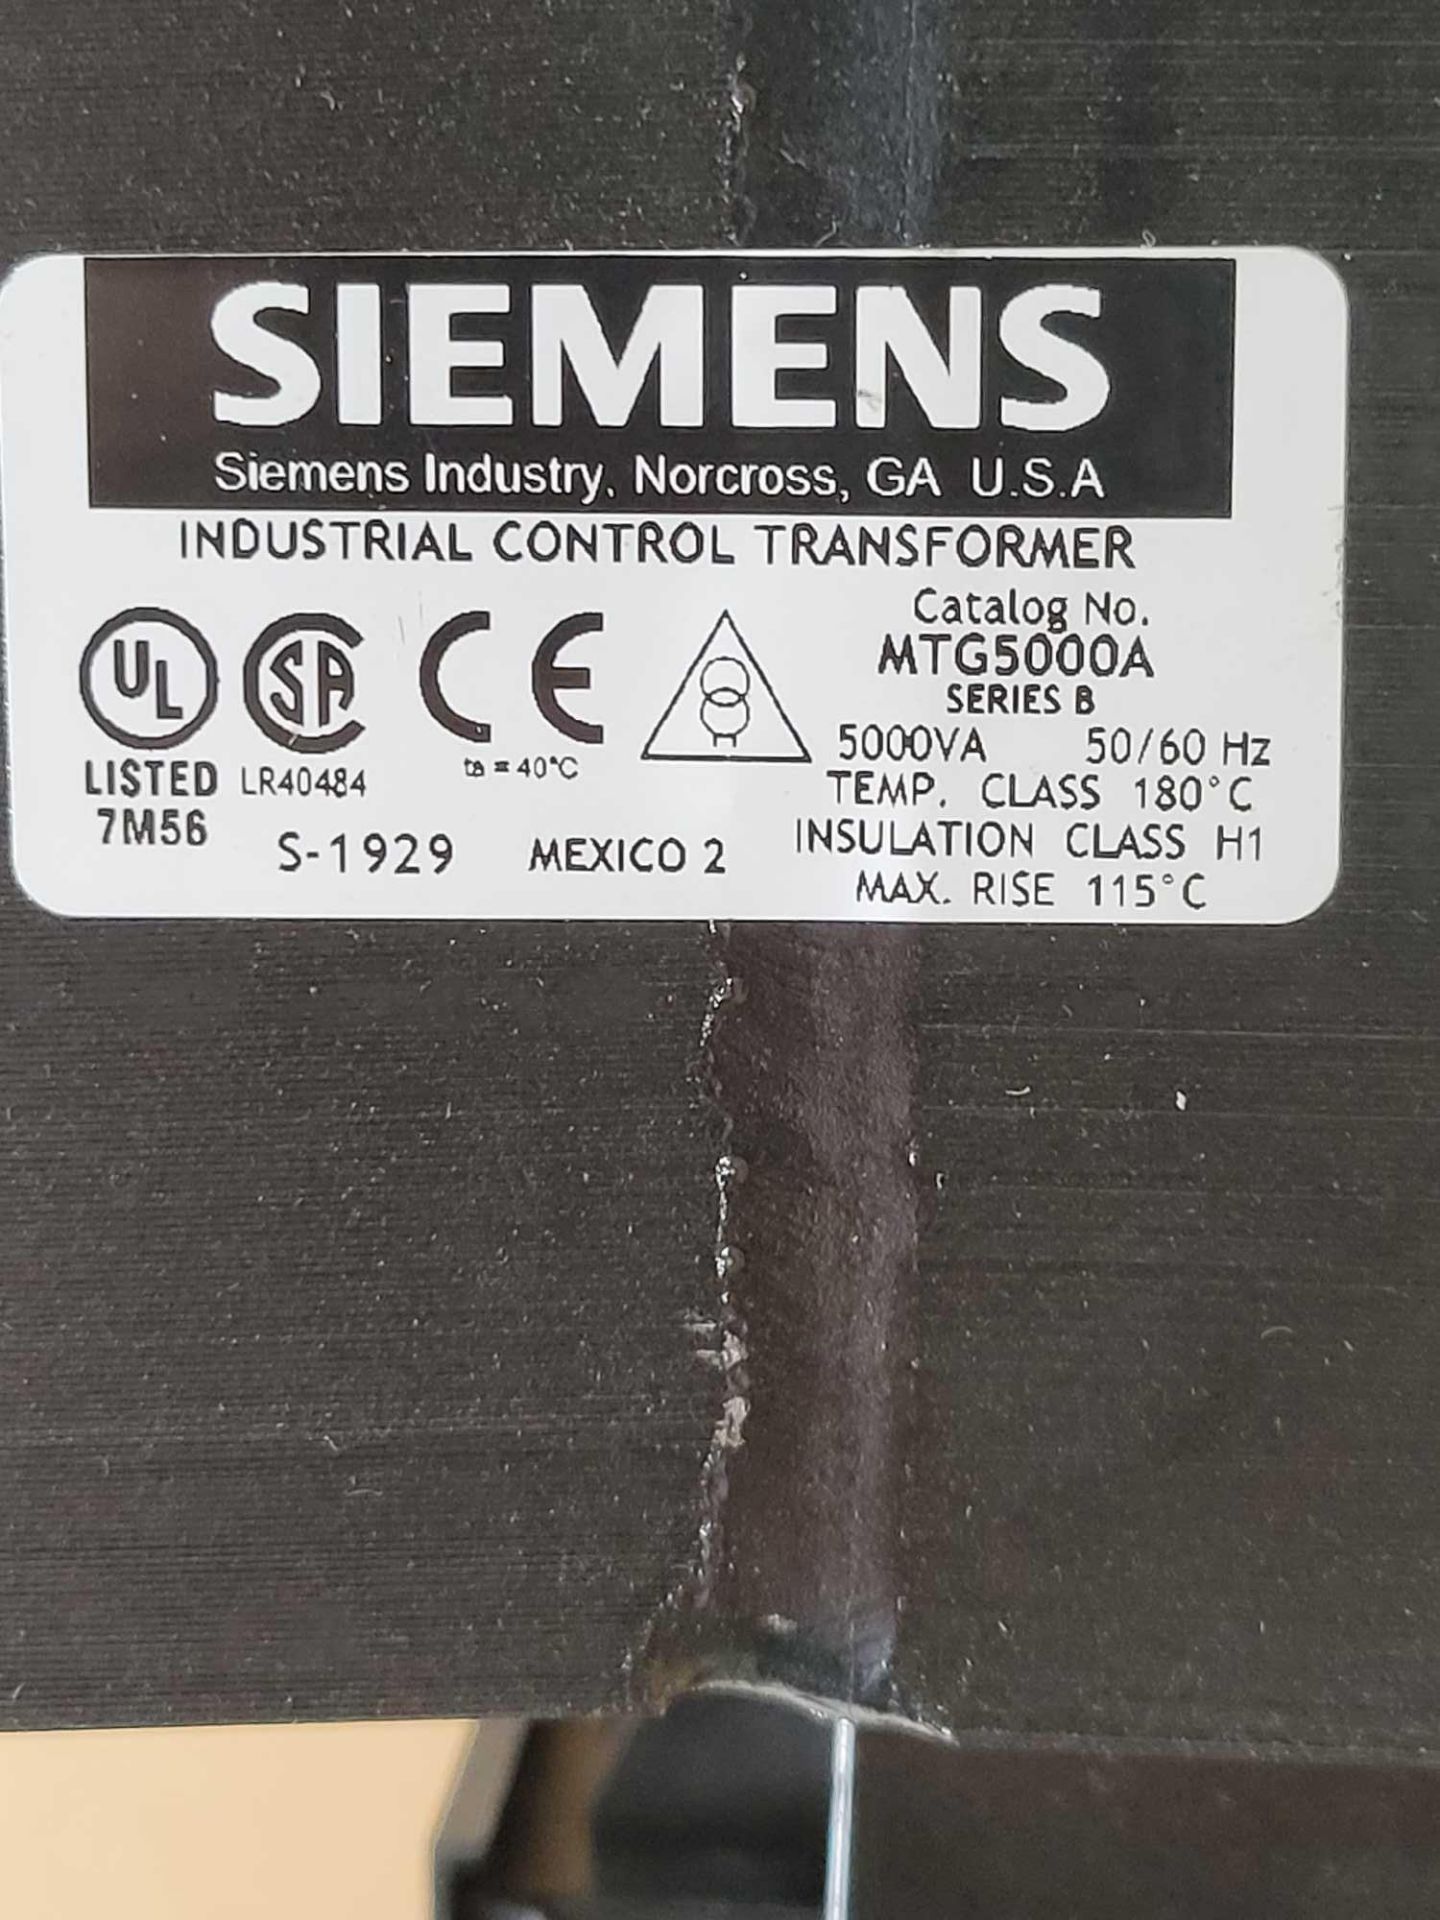 SIEMENS MTG5000A / Series B Industrial Control Transformer  /  Lot Weight: 73.6 lbs - Image 6 of 7